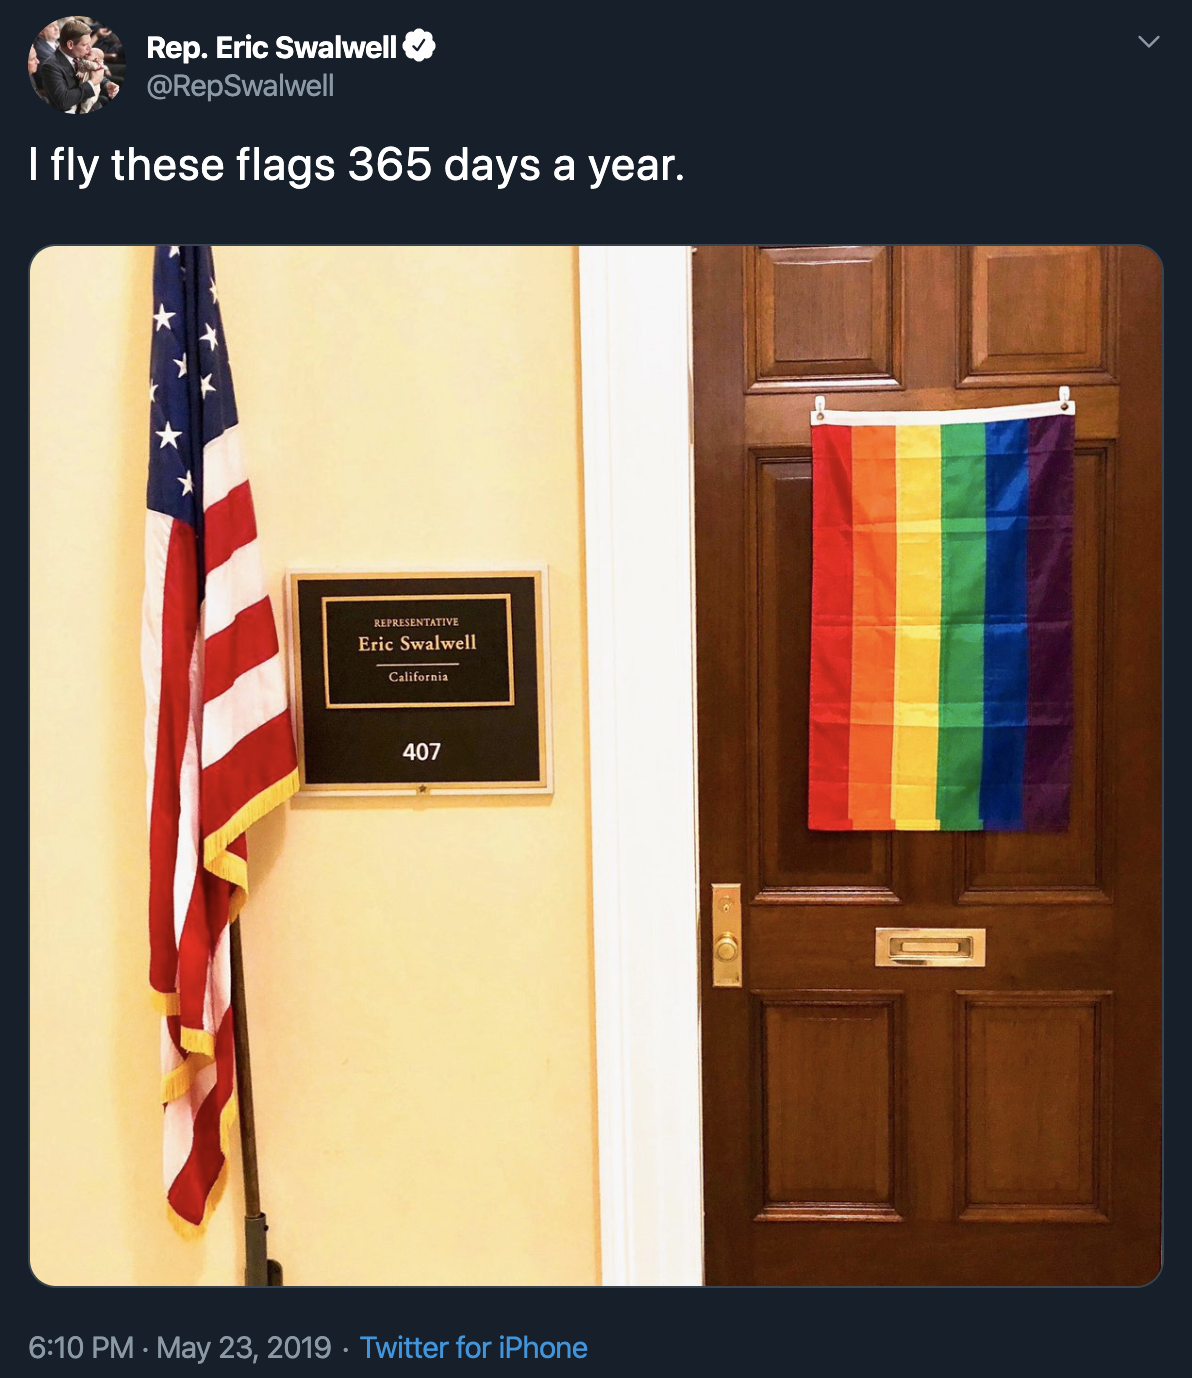 Eric Swalwell Lies About Displaying Flags